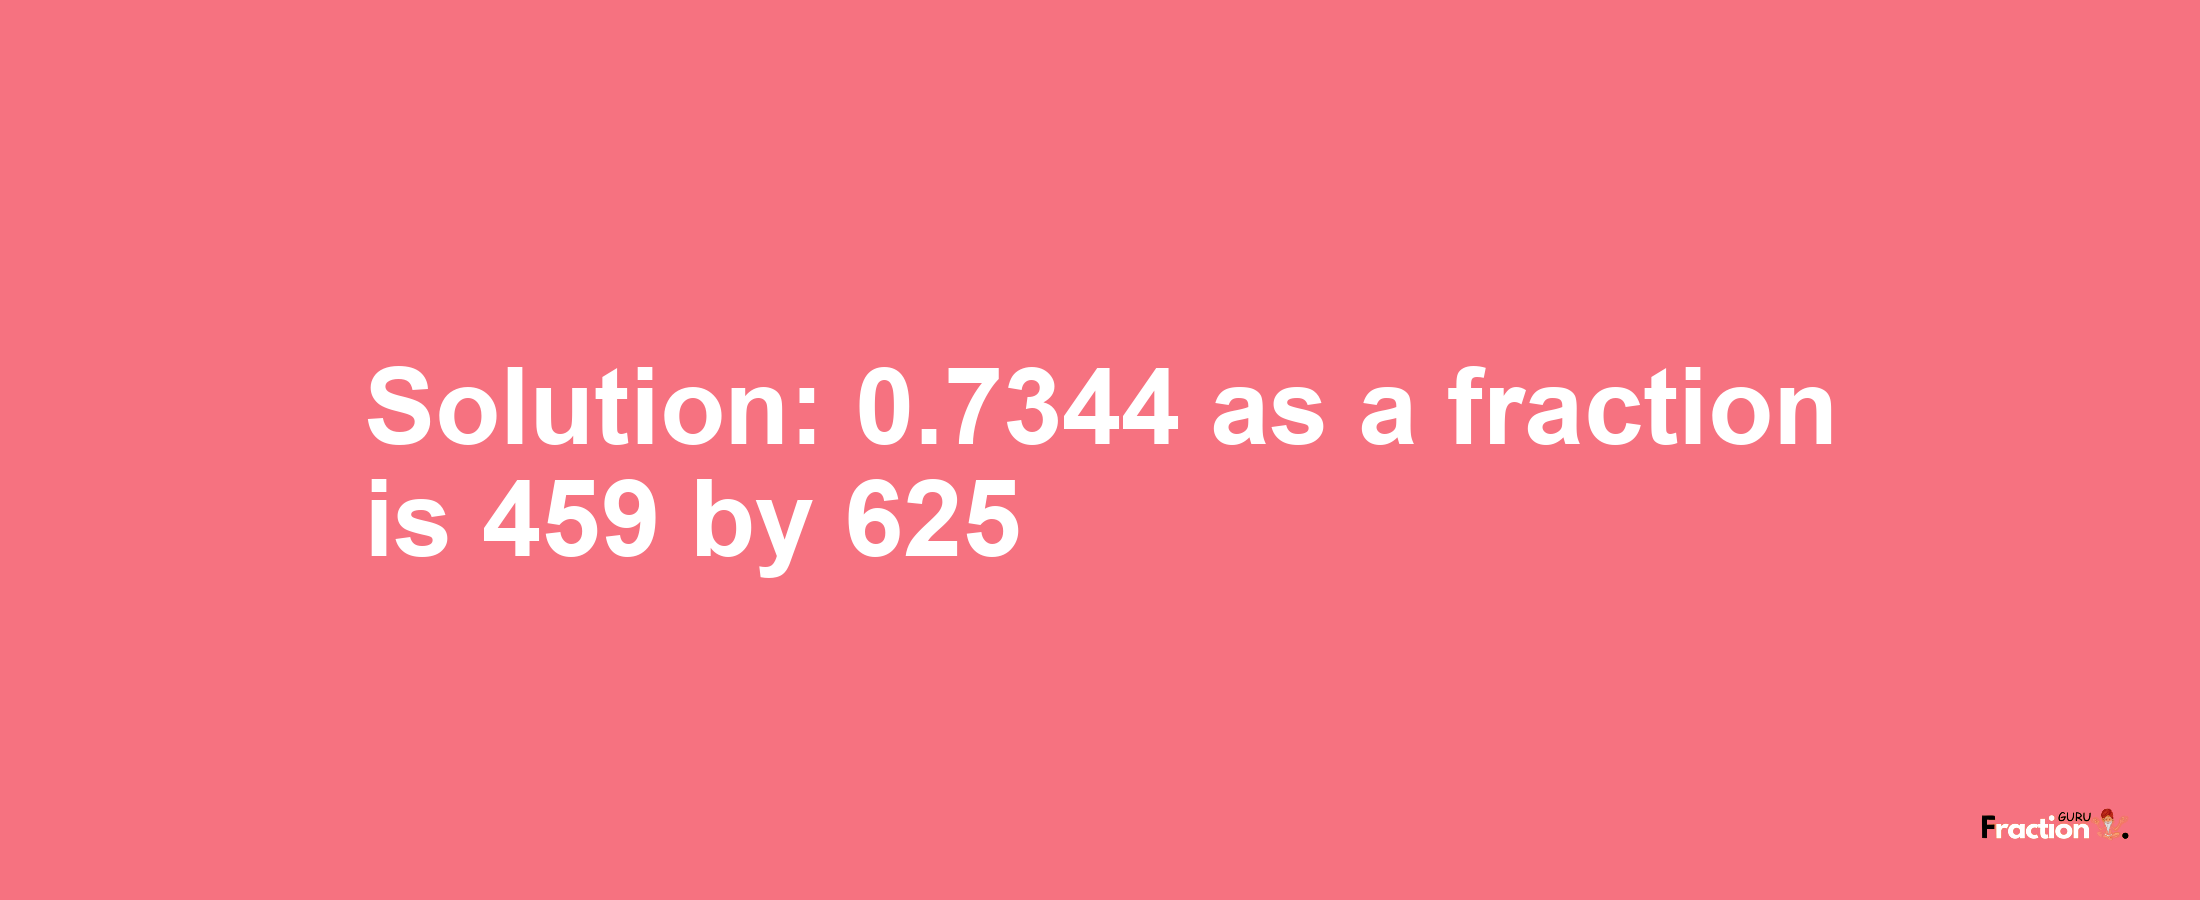 Solution:0.7344 as a fraction is 459/625